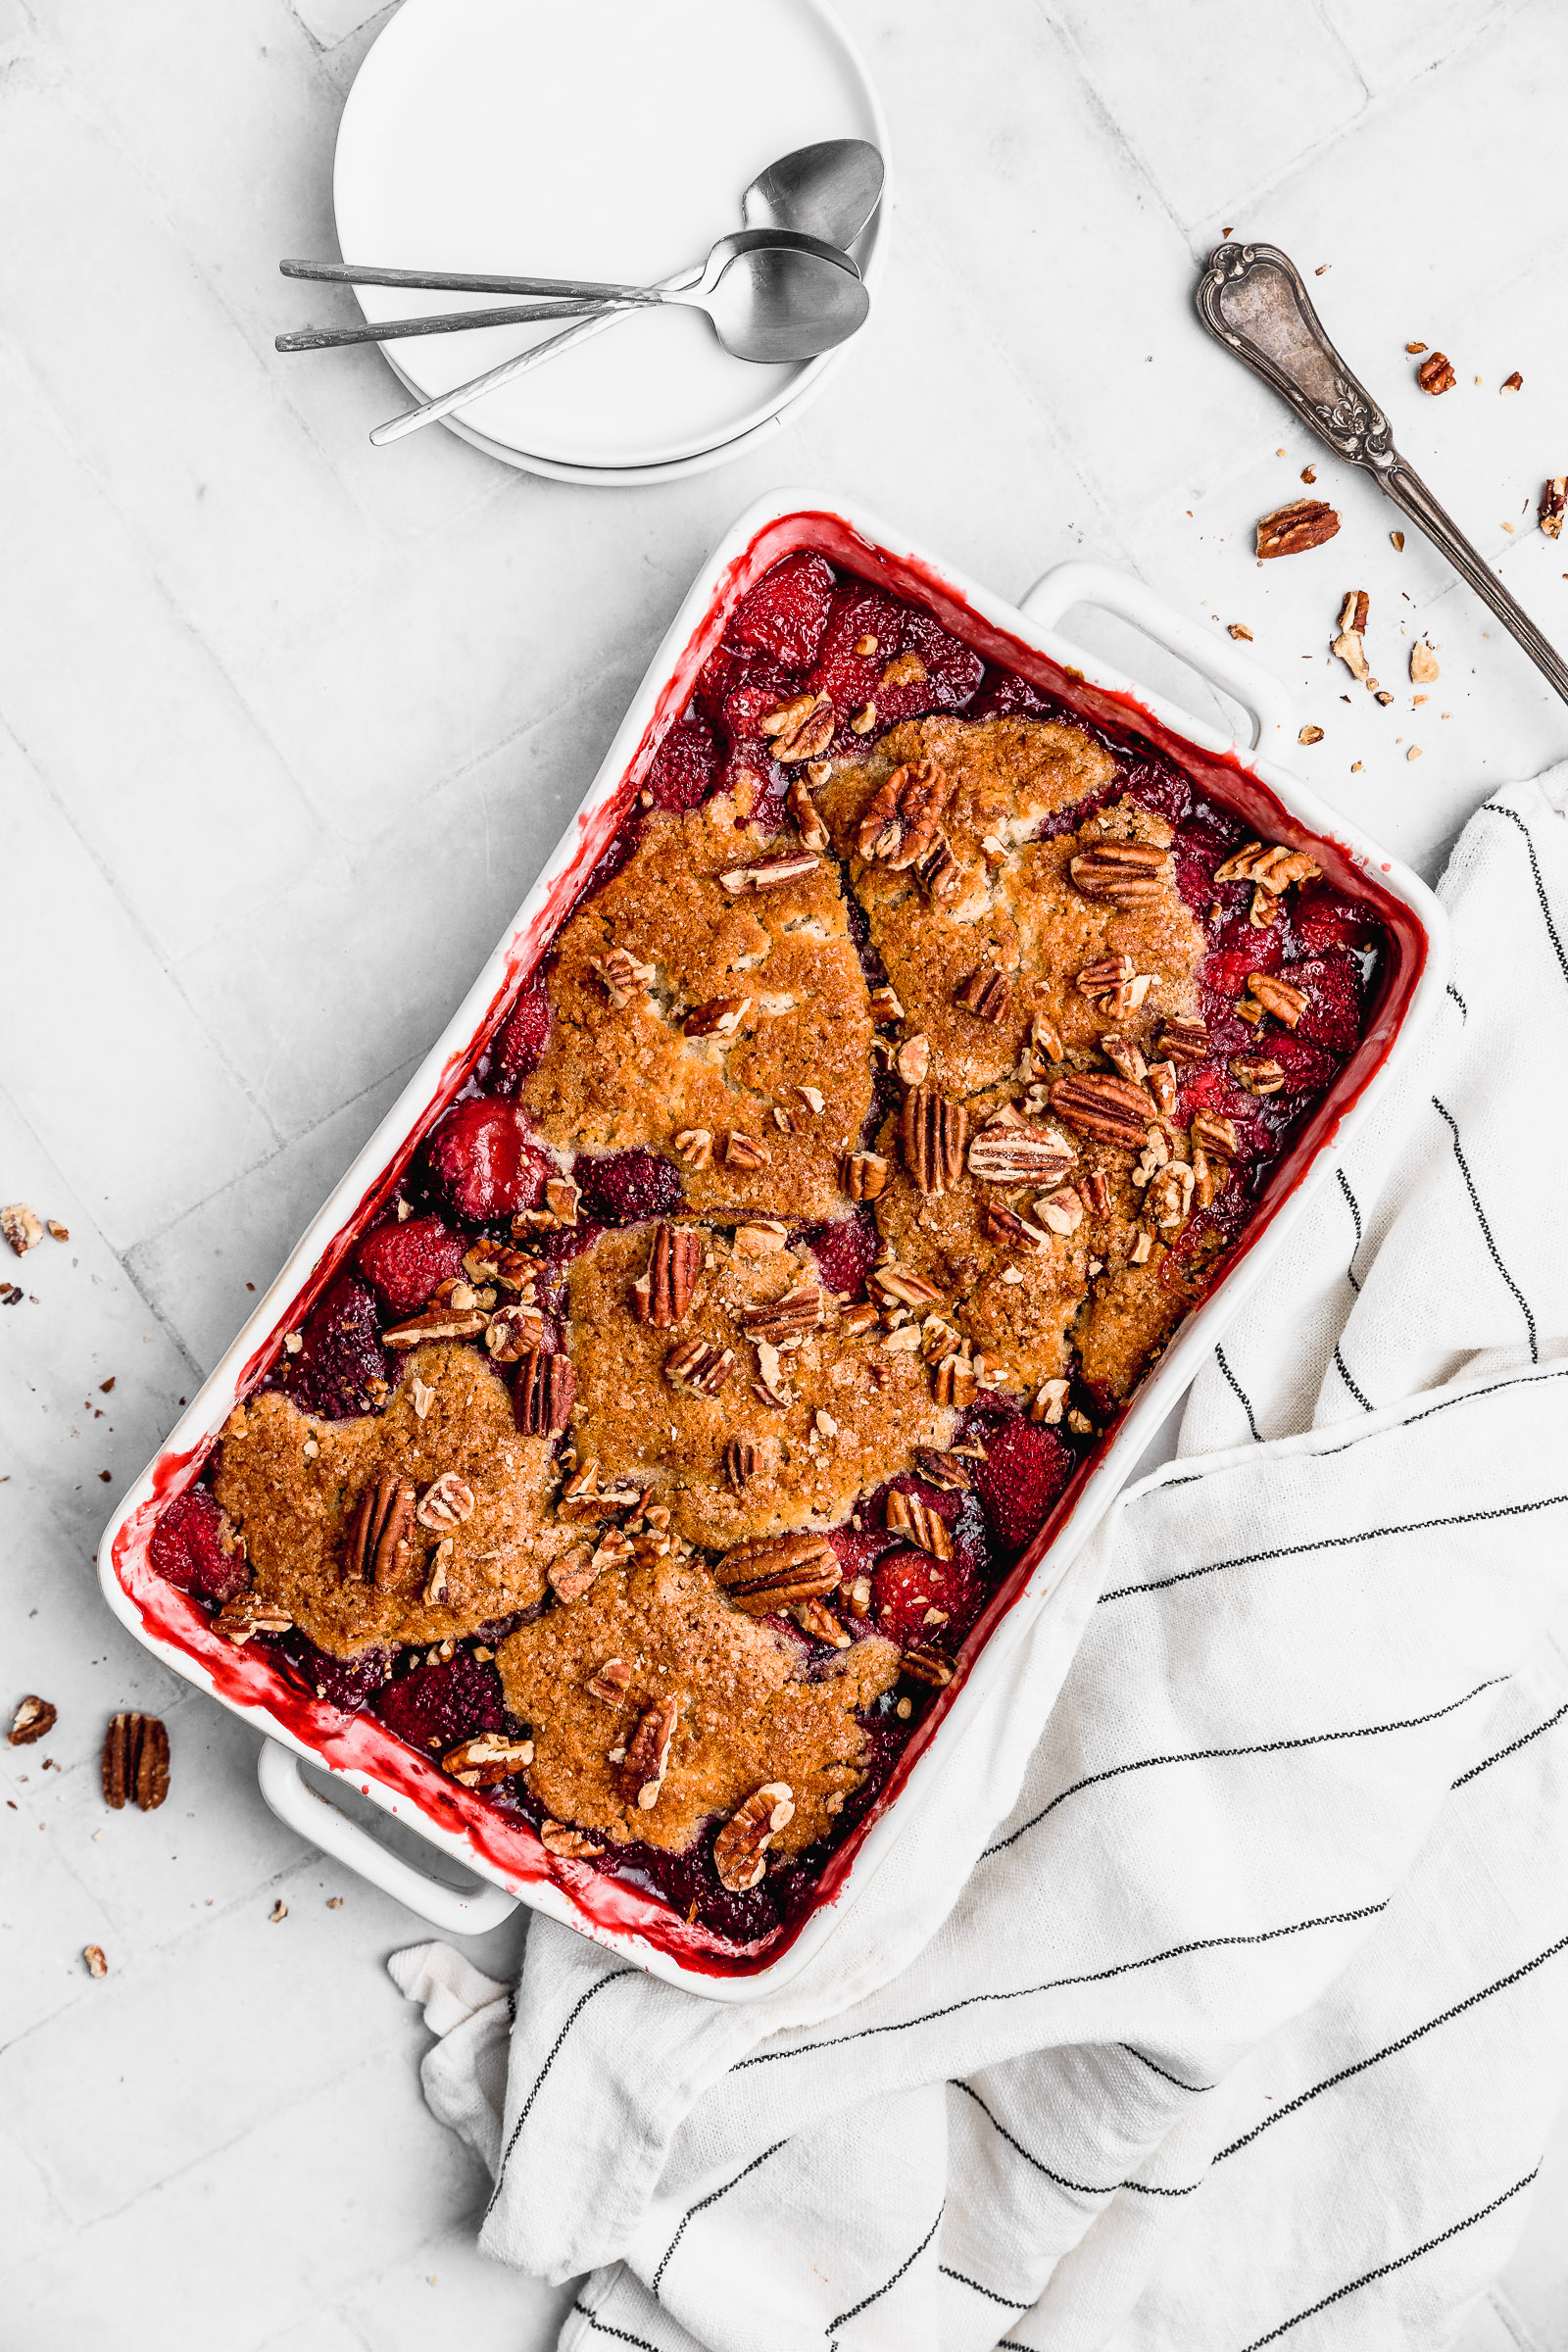 Top view of a strawberry cobbler in a baking dish. It's crispy on top and you can see the filling peeking through as well. It's finished with chopped pecans.